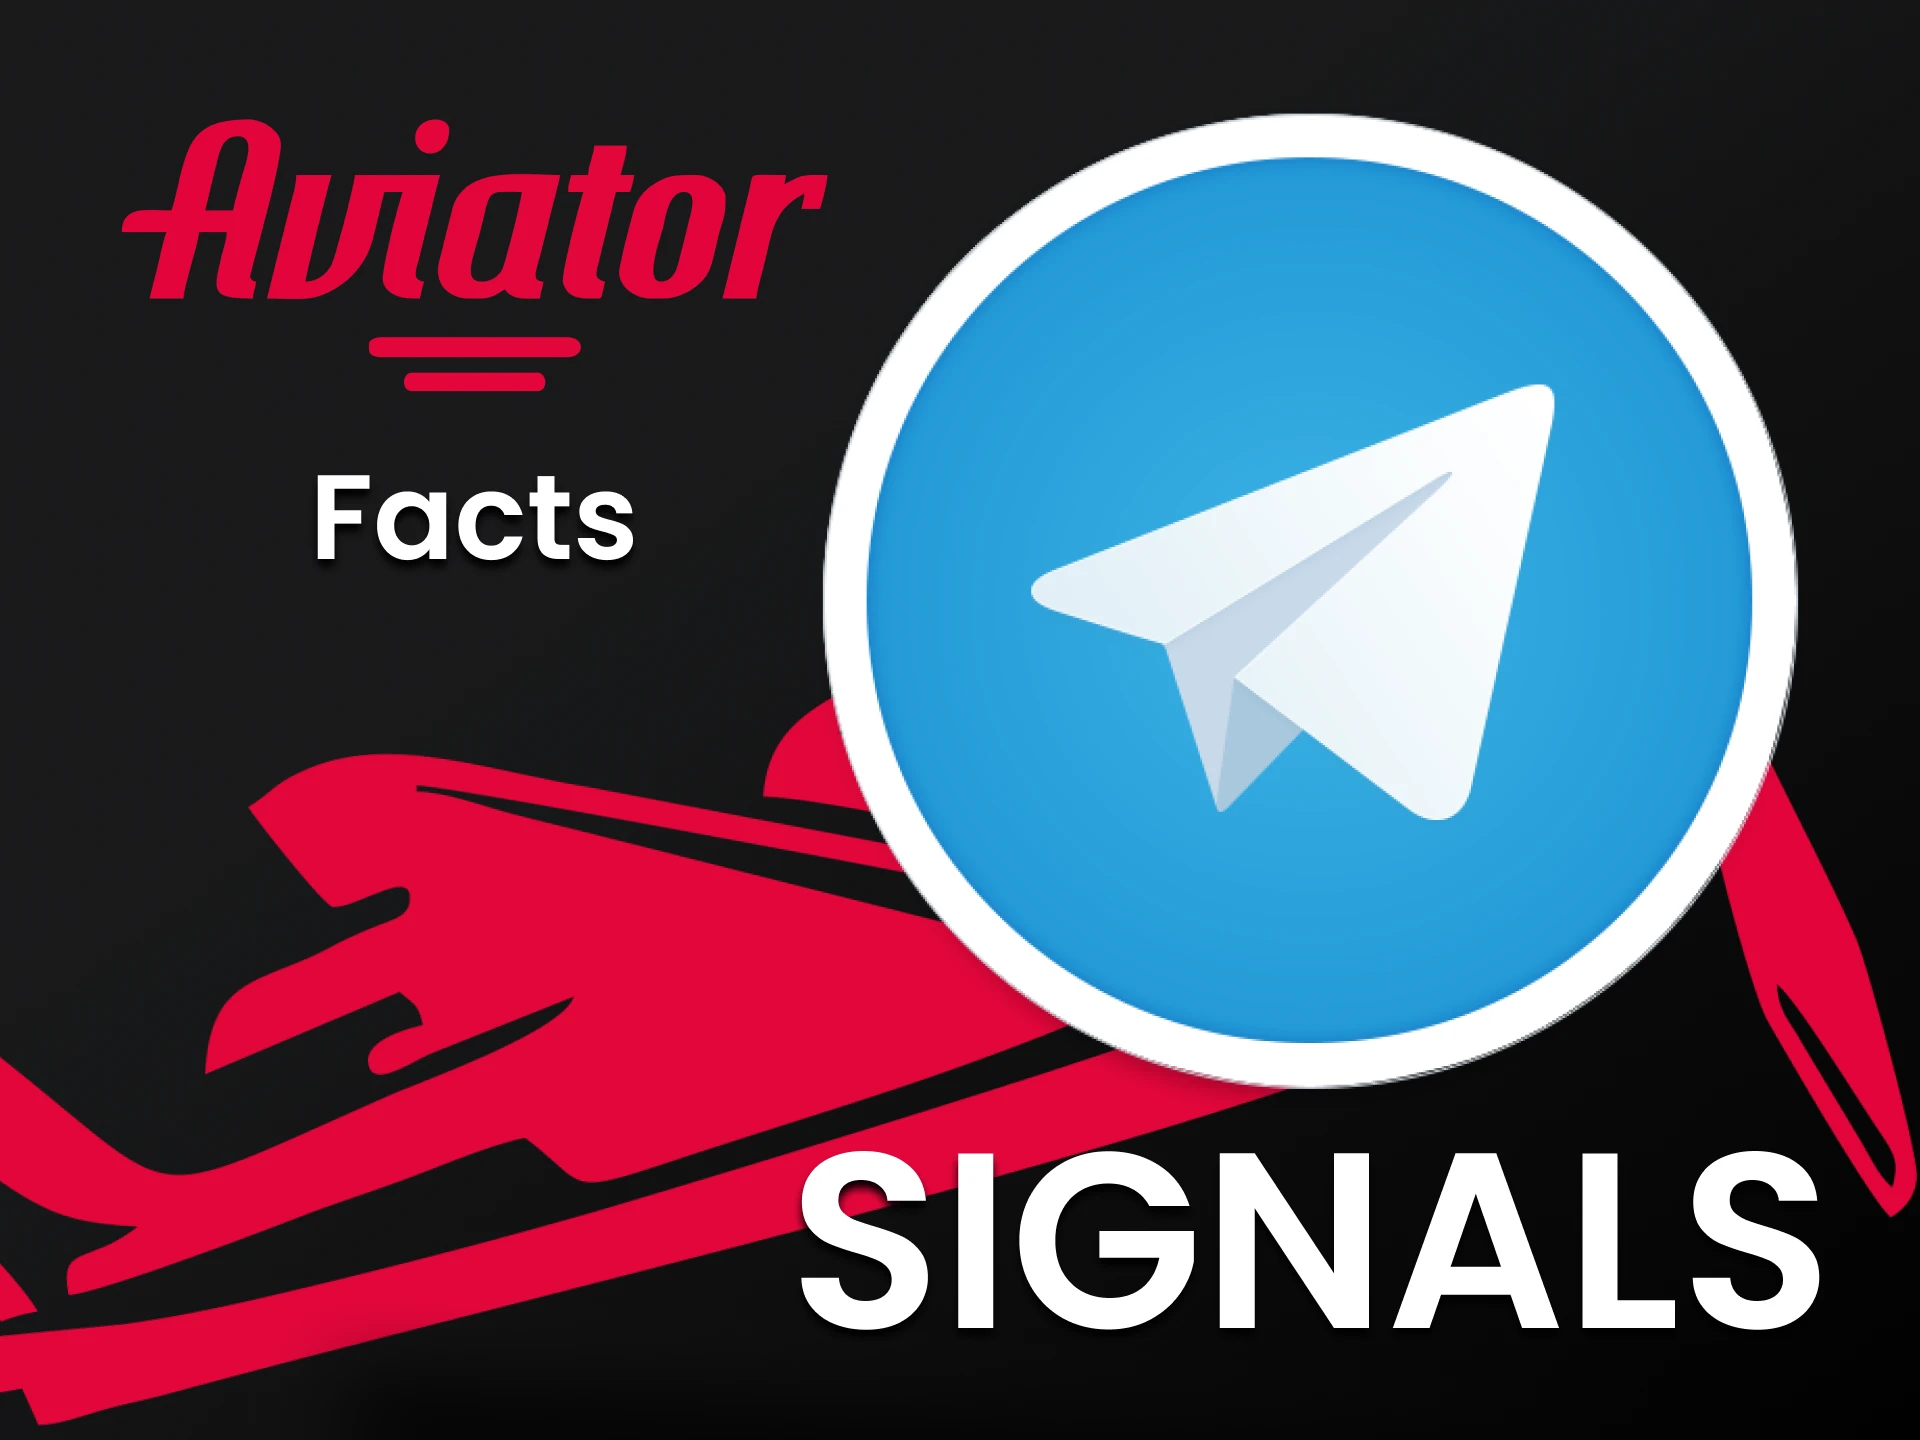 We will tell you the most necessary and useful information about signals for Aviator.